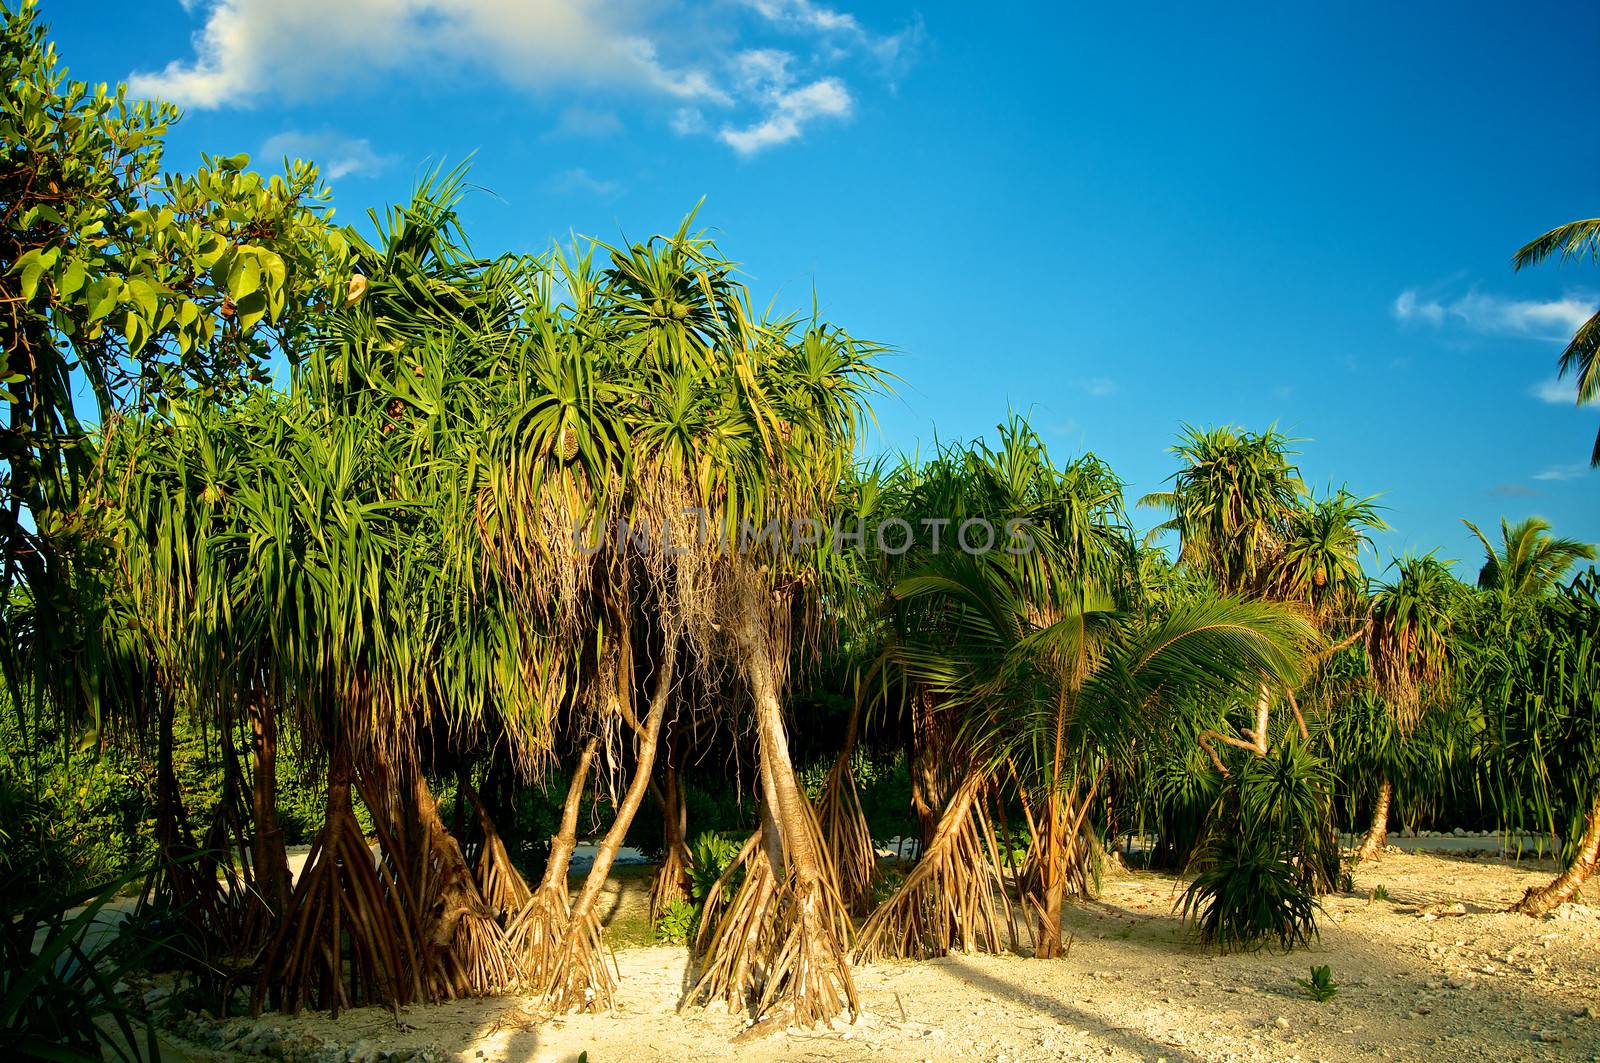 Alley of Exotic Screw Pine Trees on Sand outdoors